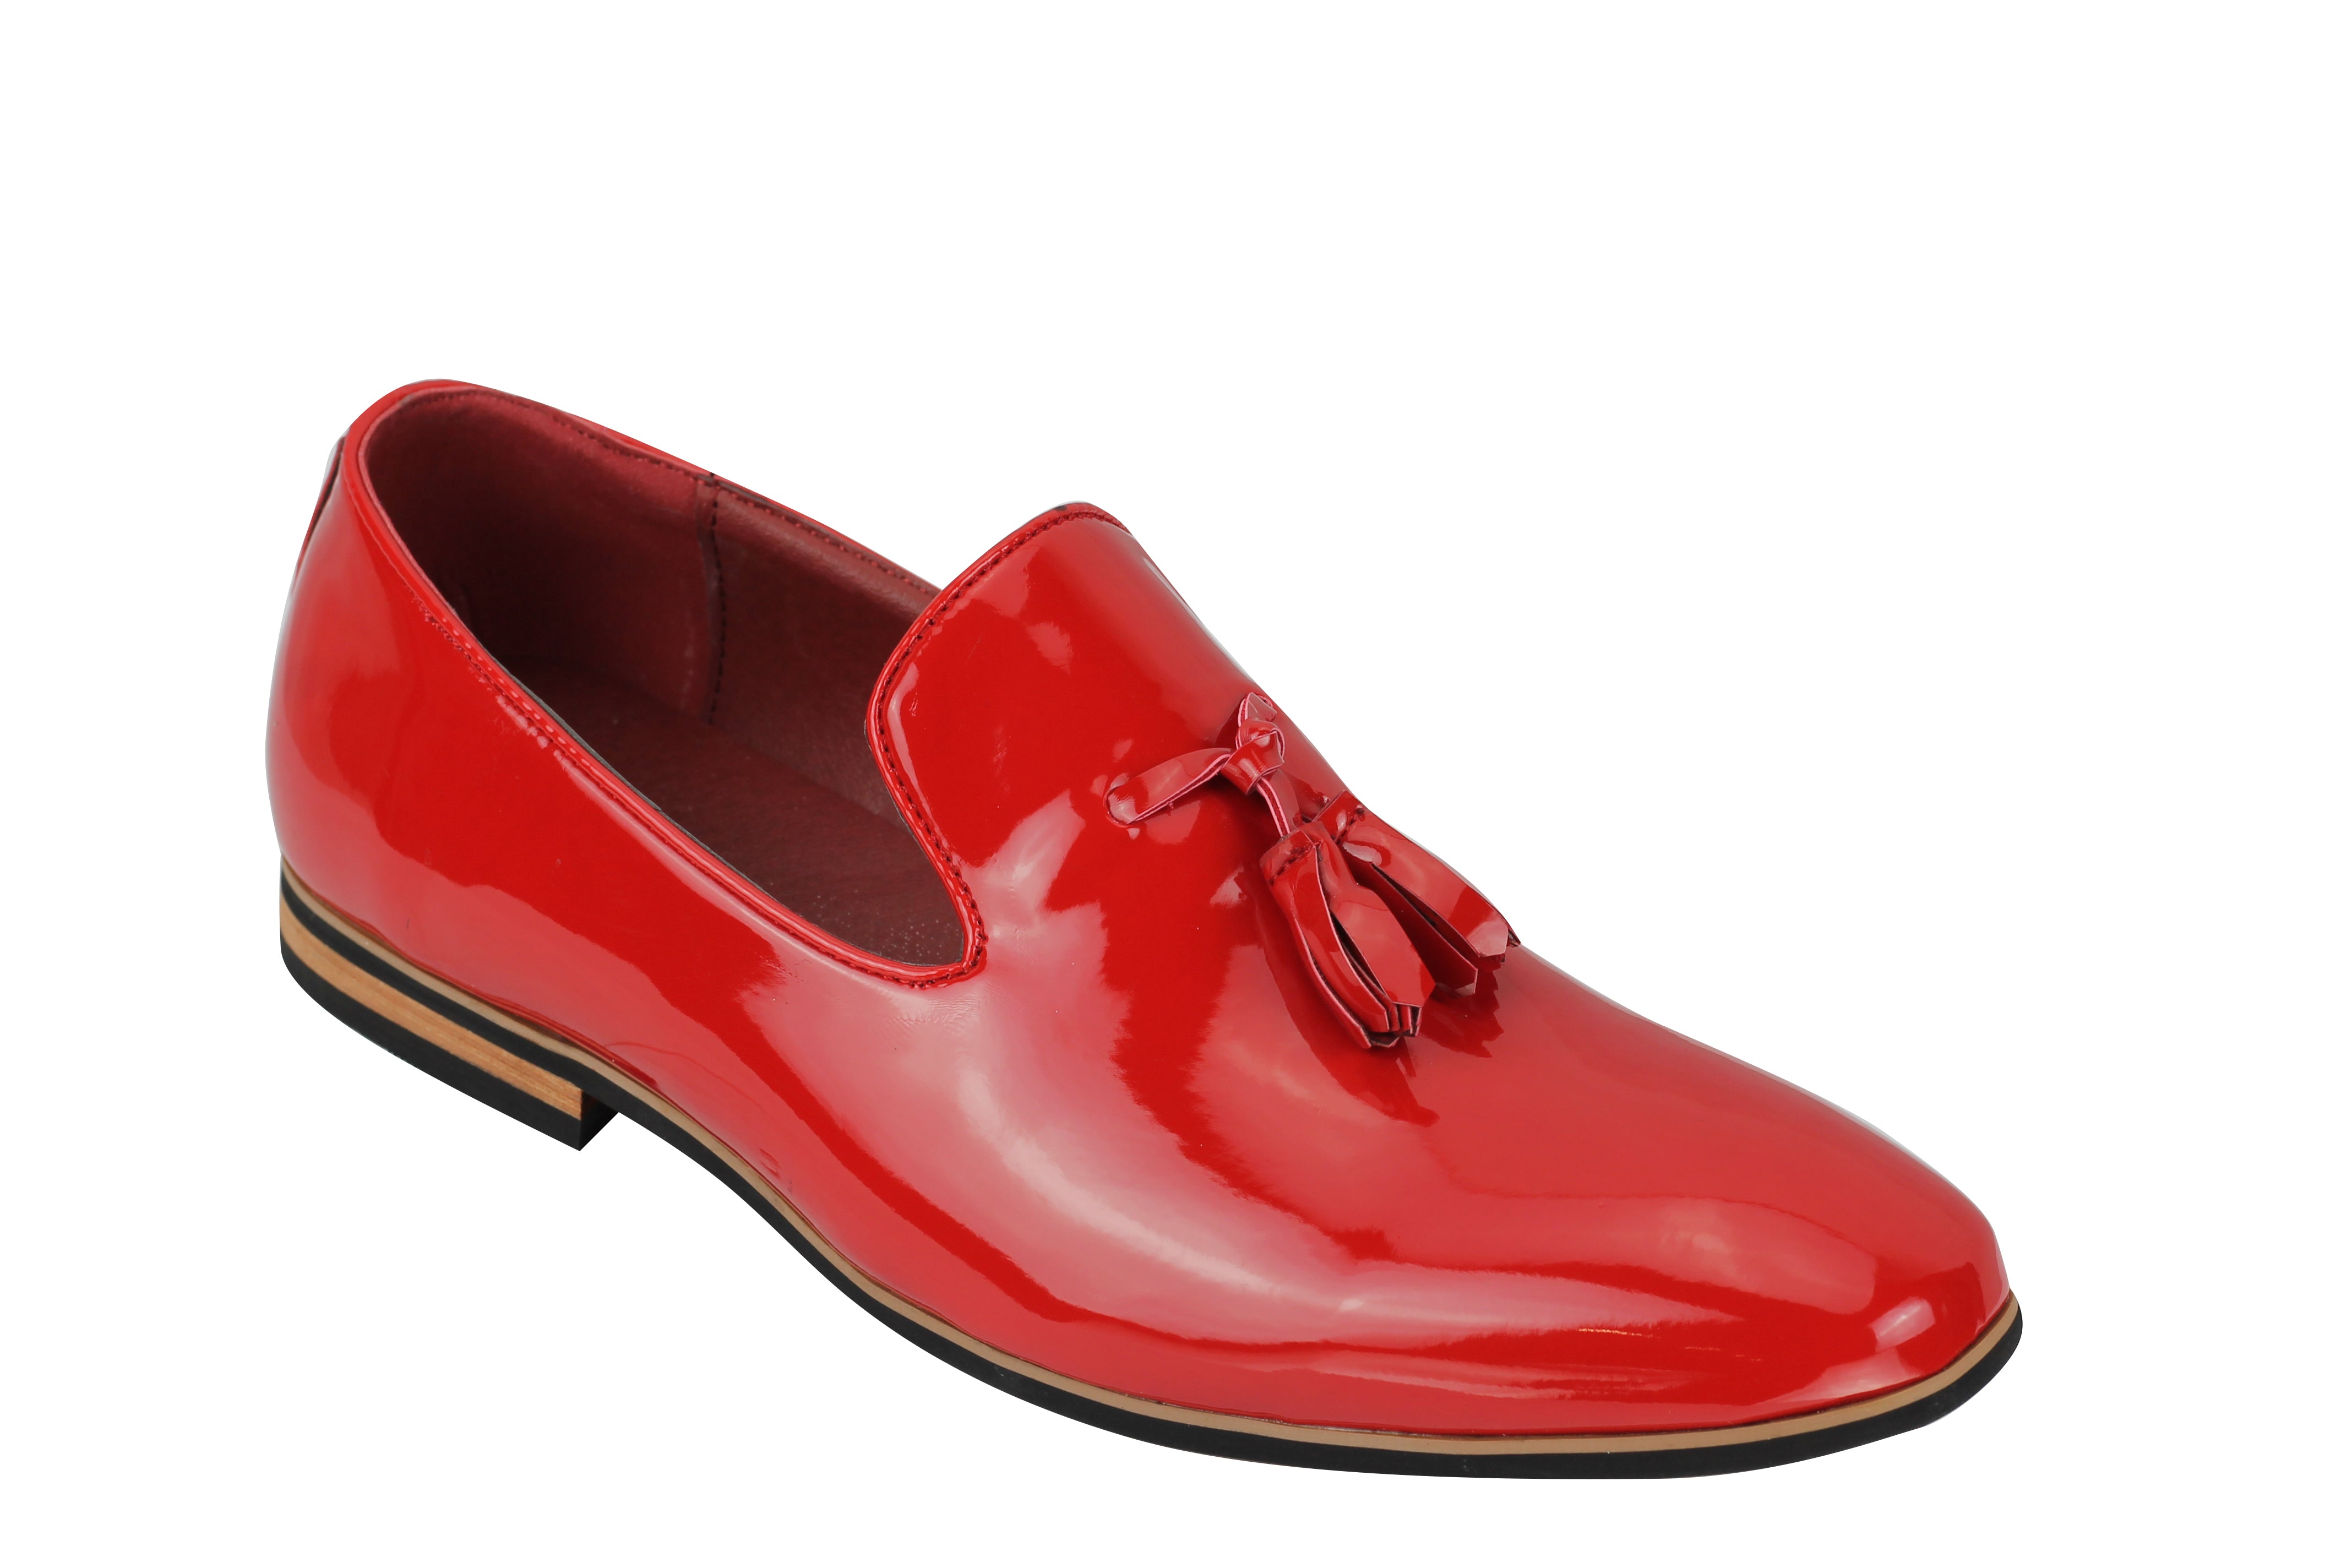 Shiny Patent Leather Slip On Shoes In Red